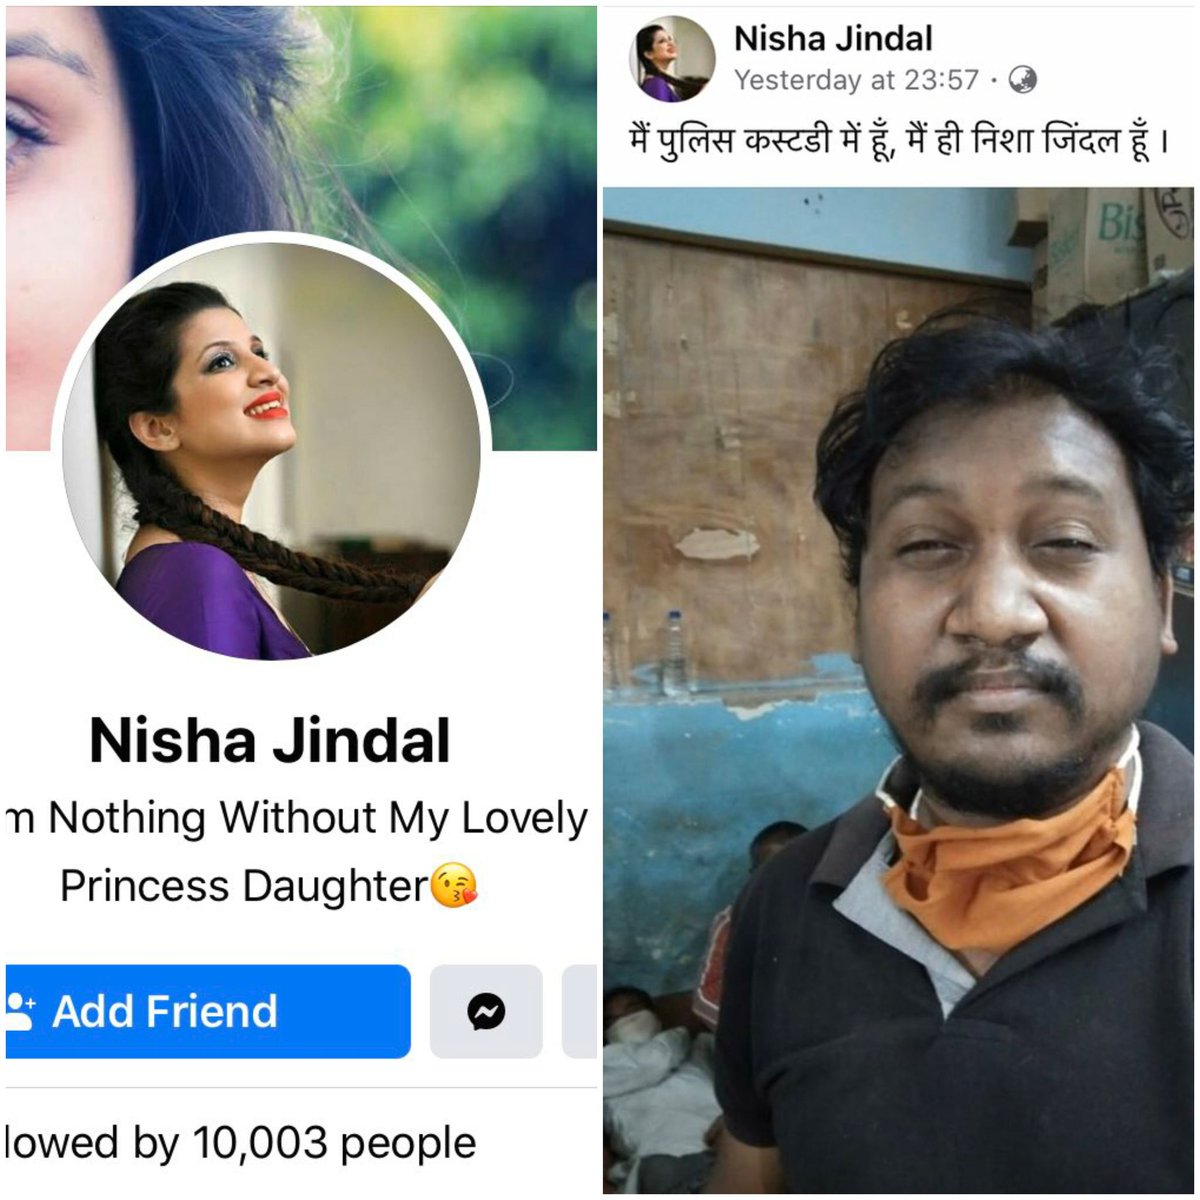 निशा के बदले निशाचर 😈

This is what Raipur Police found when they reached to arrest Nisha Jindal for posting communally inflammatory comments on social media. 

Two minutes silence for the 10,000 heartbroken followers also. Many used to have private chat with her/him 😅